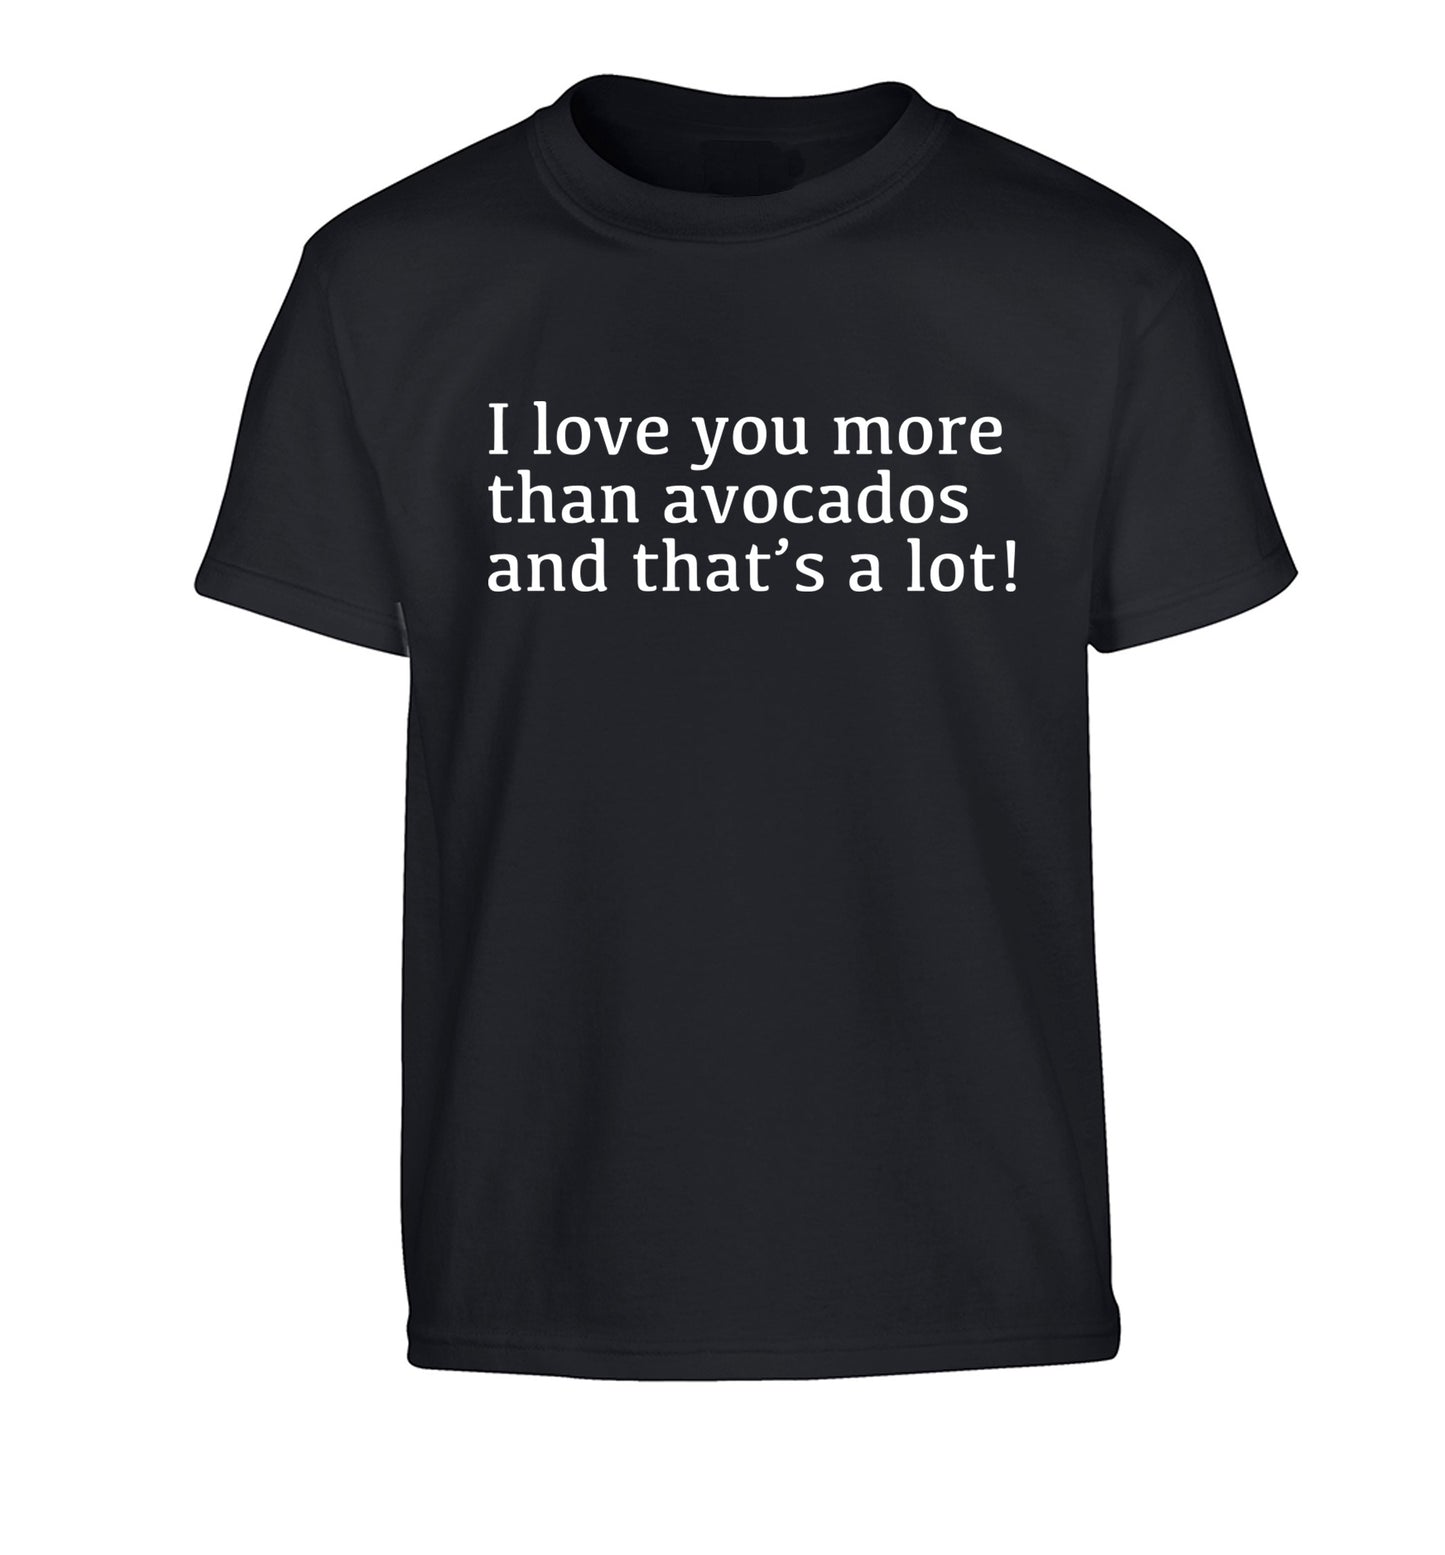 I love you more than avocados and that's a lot Children's black Tshirt 12-14 Years